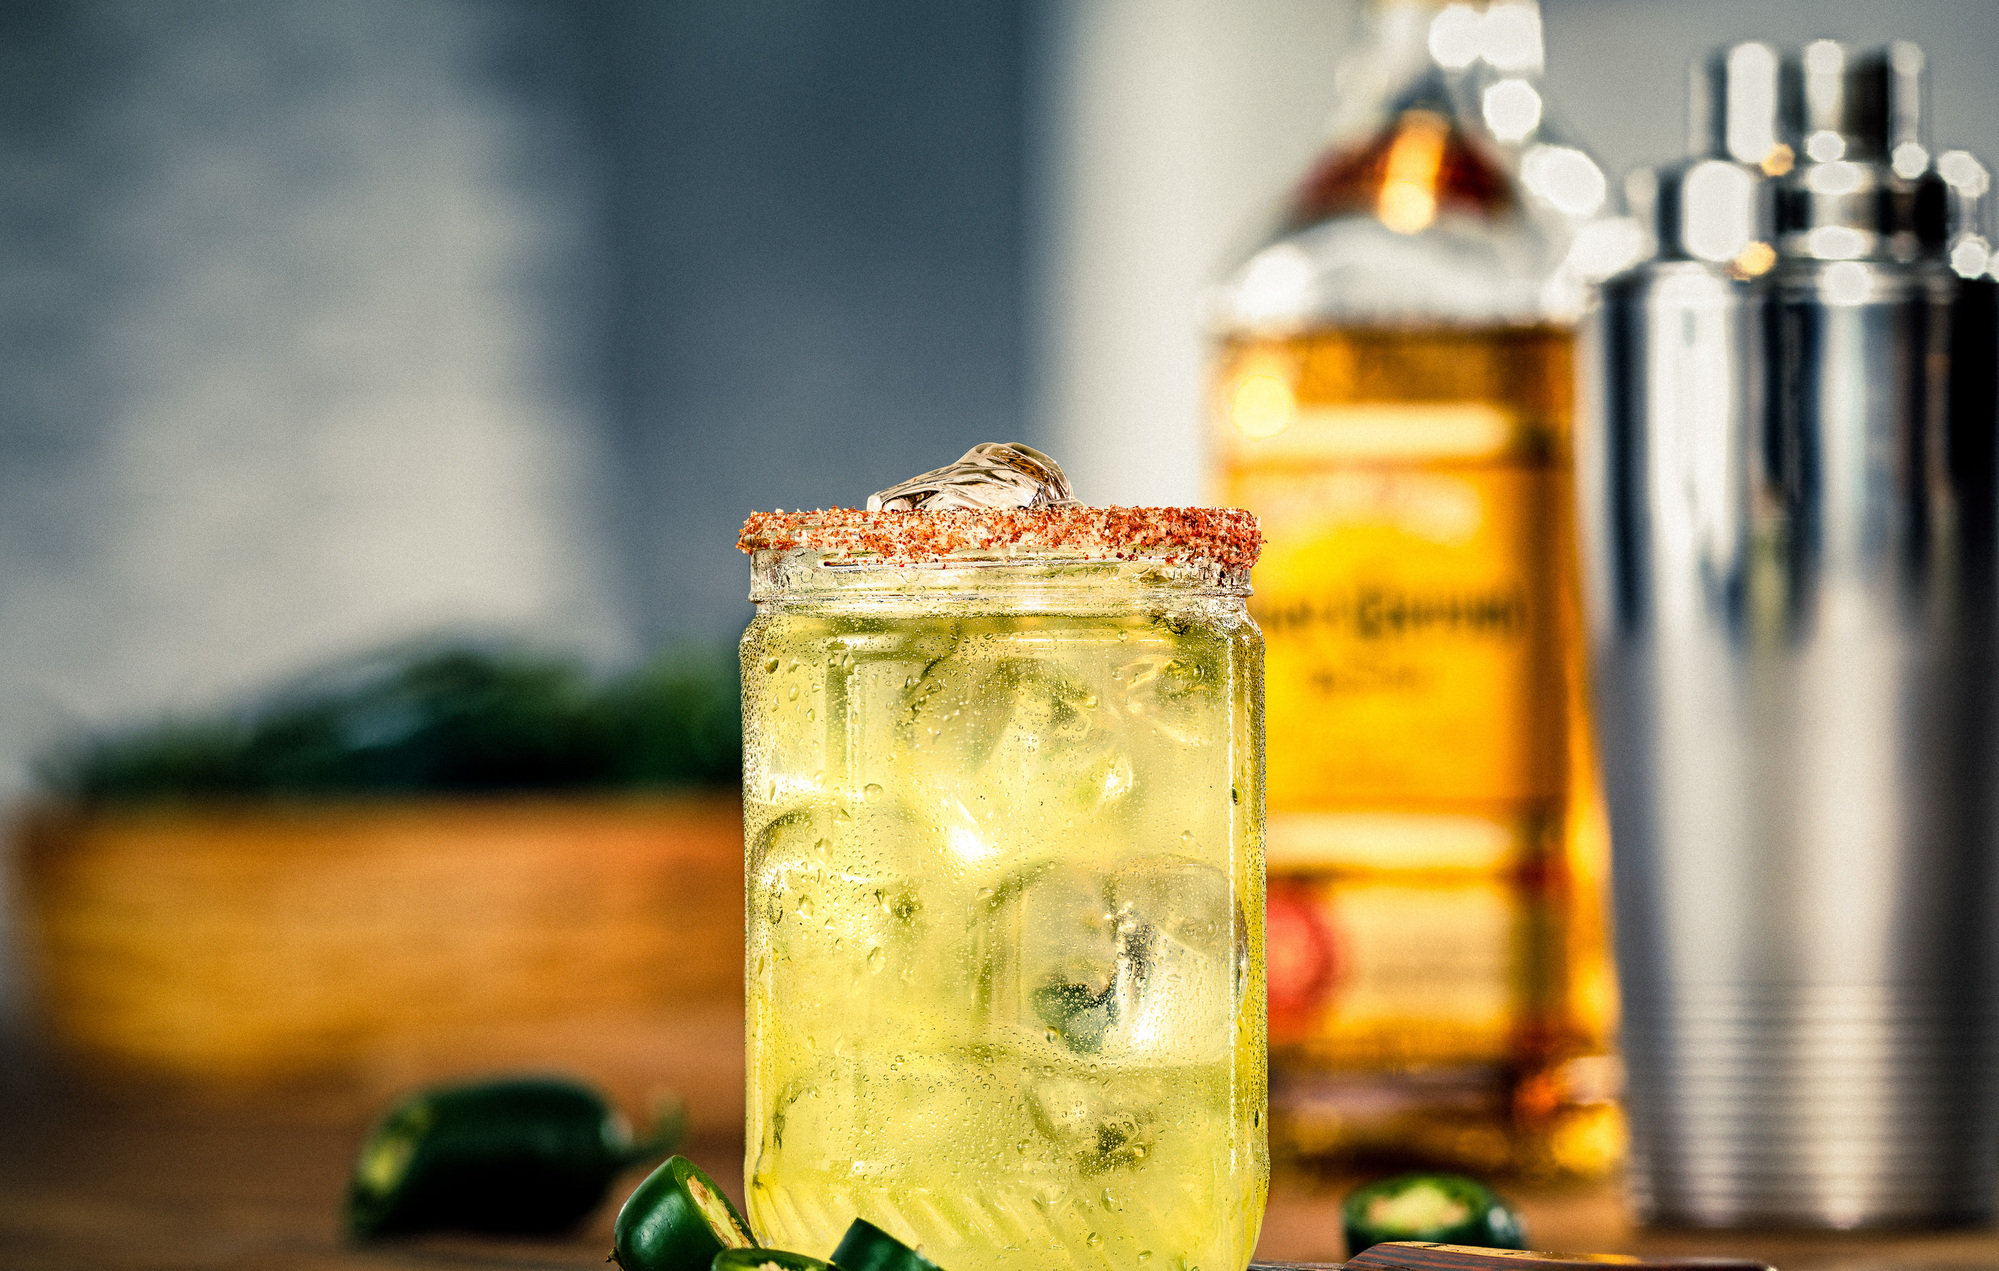 Jose Cuervo tequila bottle and cocktail by beverage photographer Timothy Hogan. 

Beverages and alcohol product & advertising photography by Timothy Hogan Studio in Los Angeles